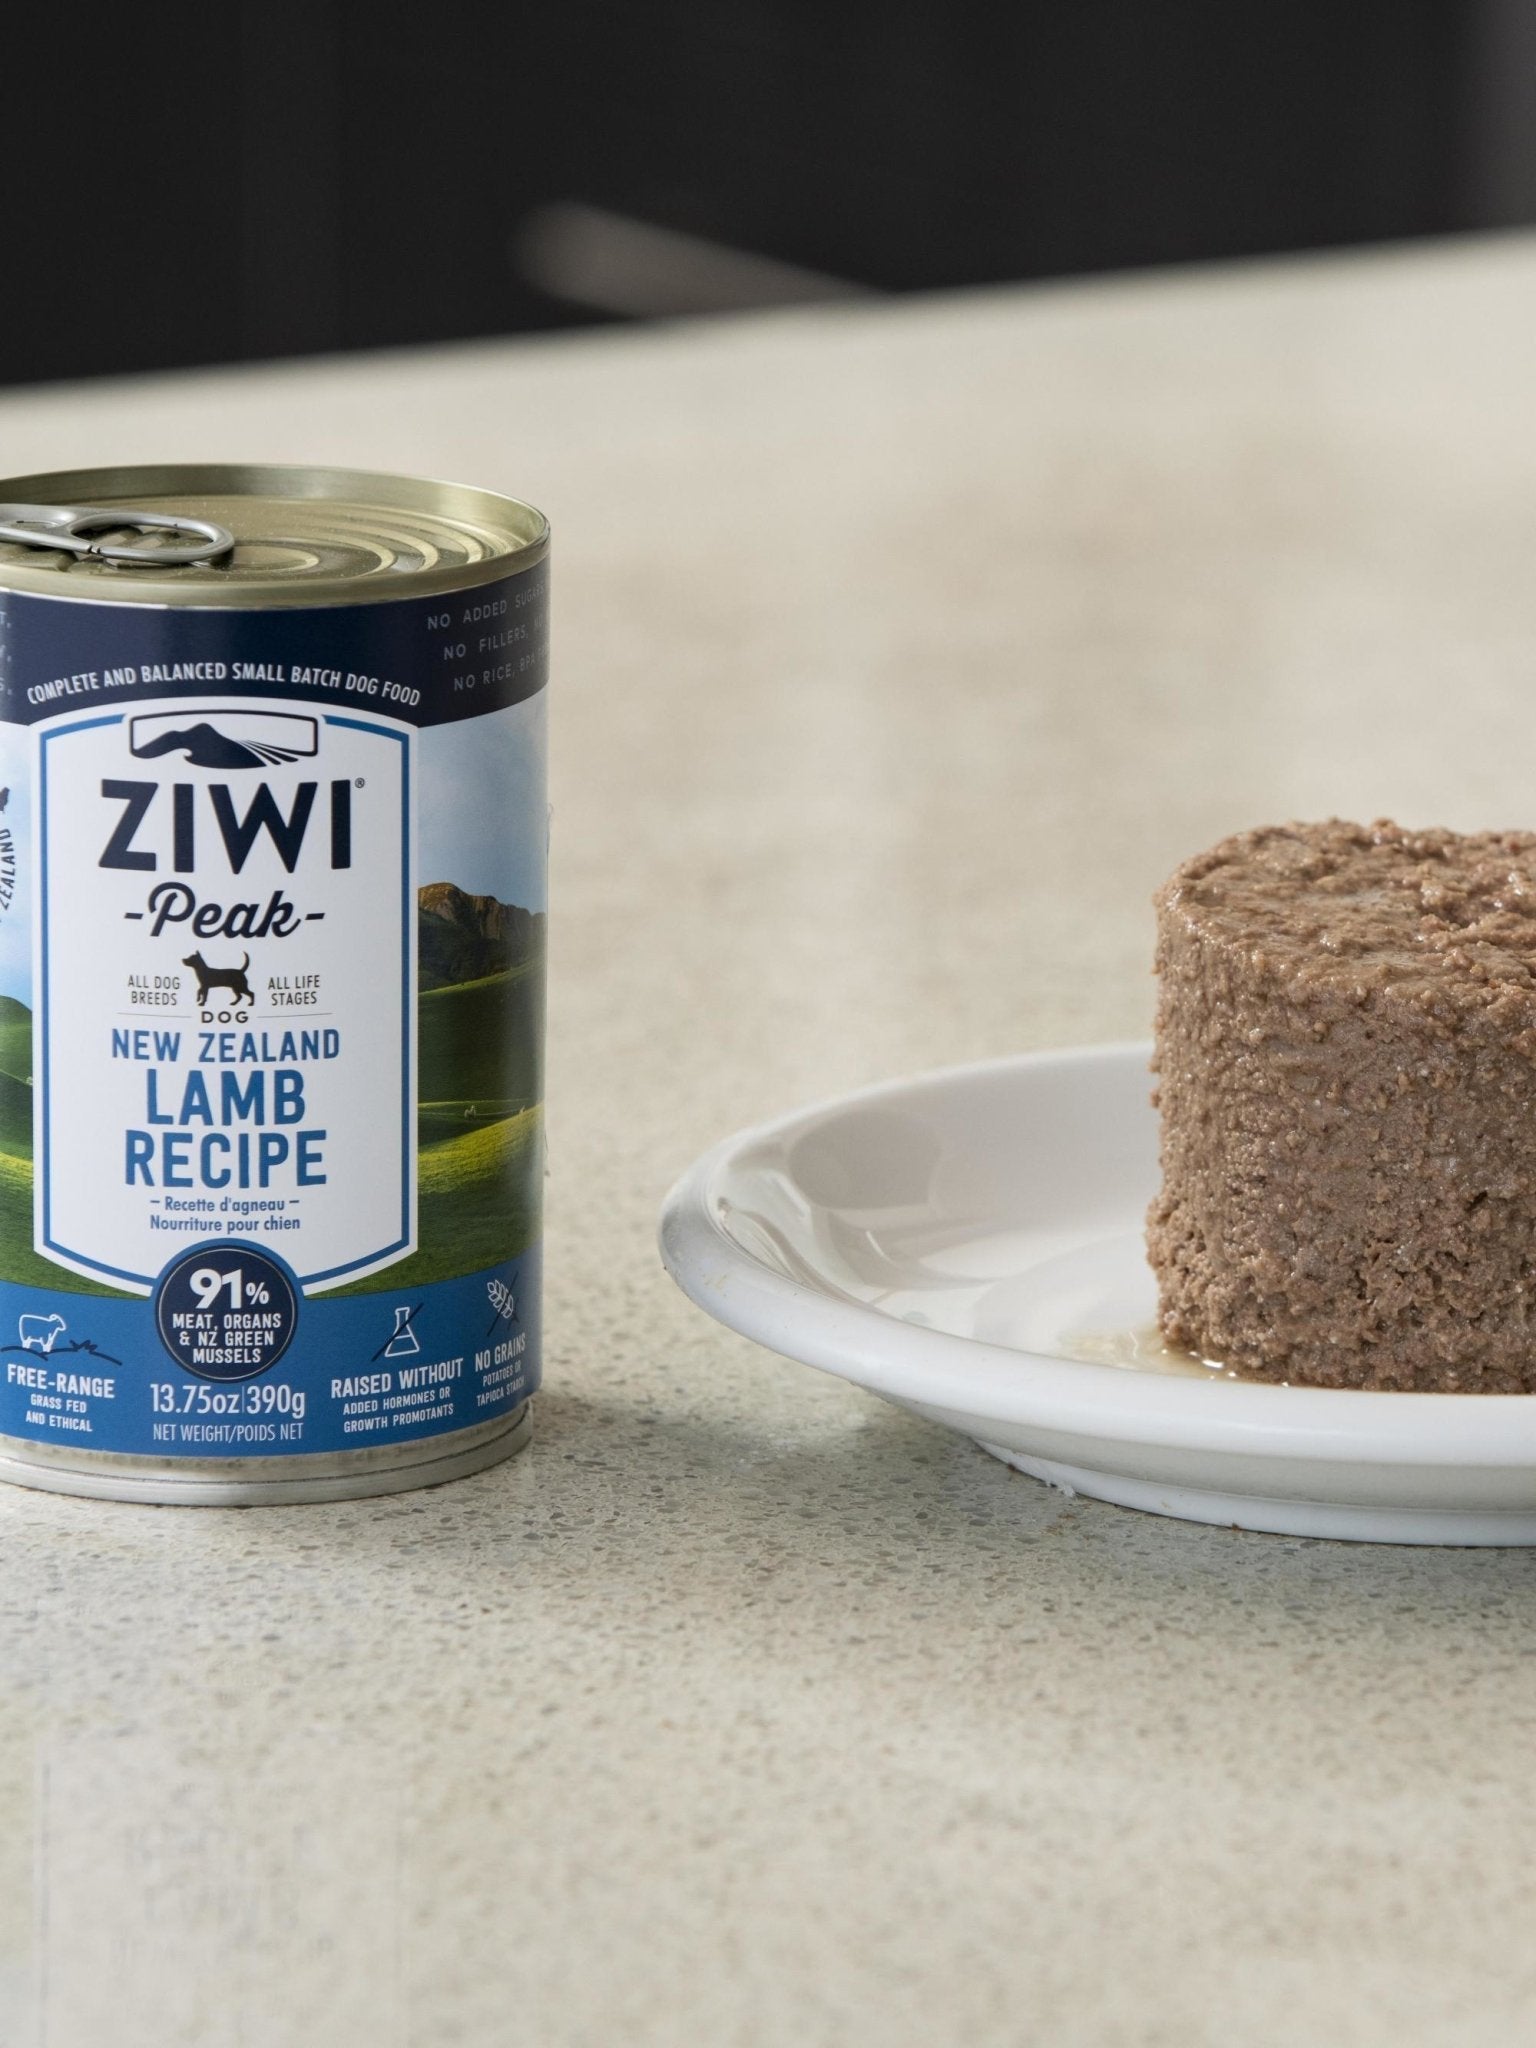 ZIWI Peak Grass-Fed Lamb Wet Dog Food - Nutritious New Zealand Recipe for All Life Stages - PAWS CLUB